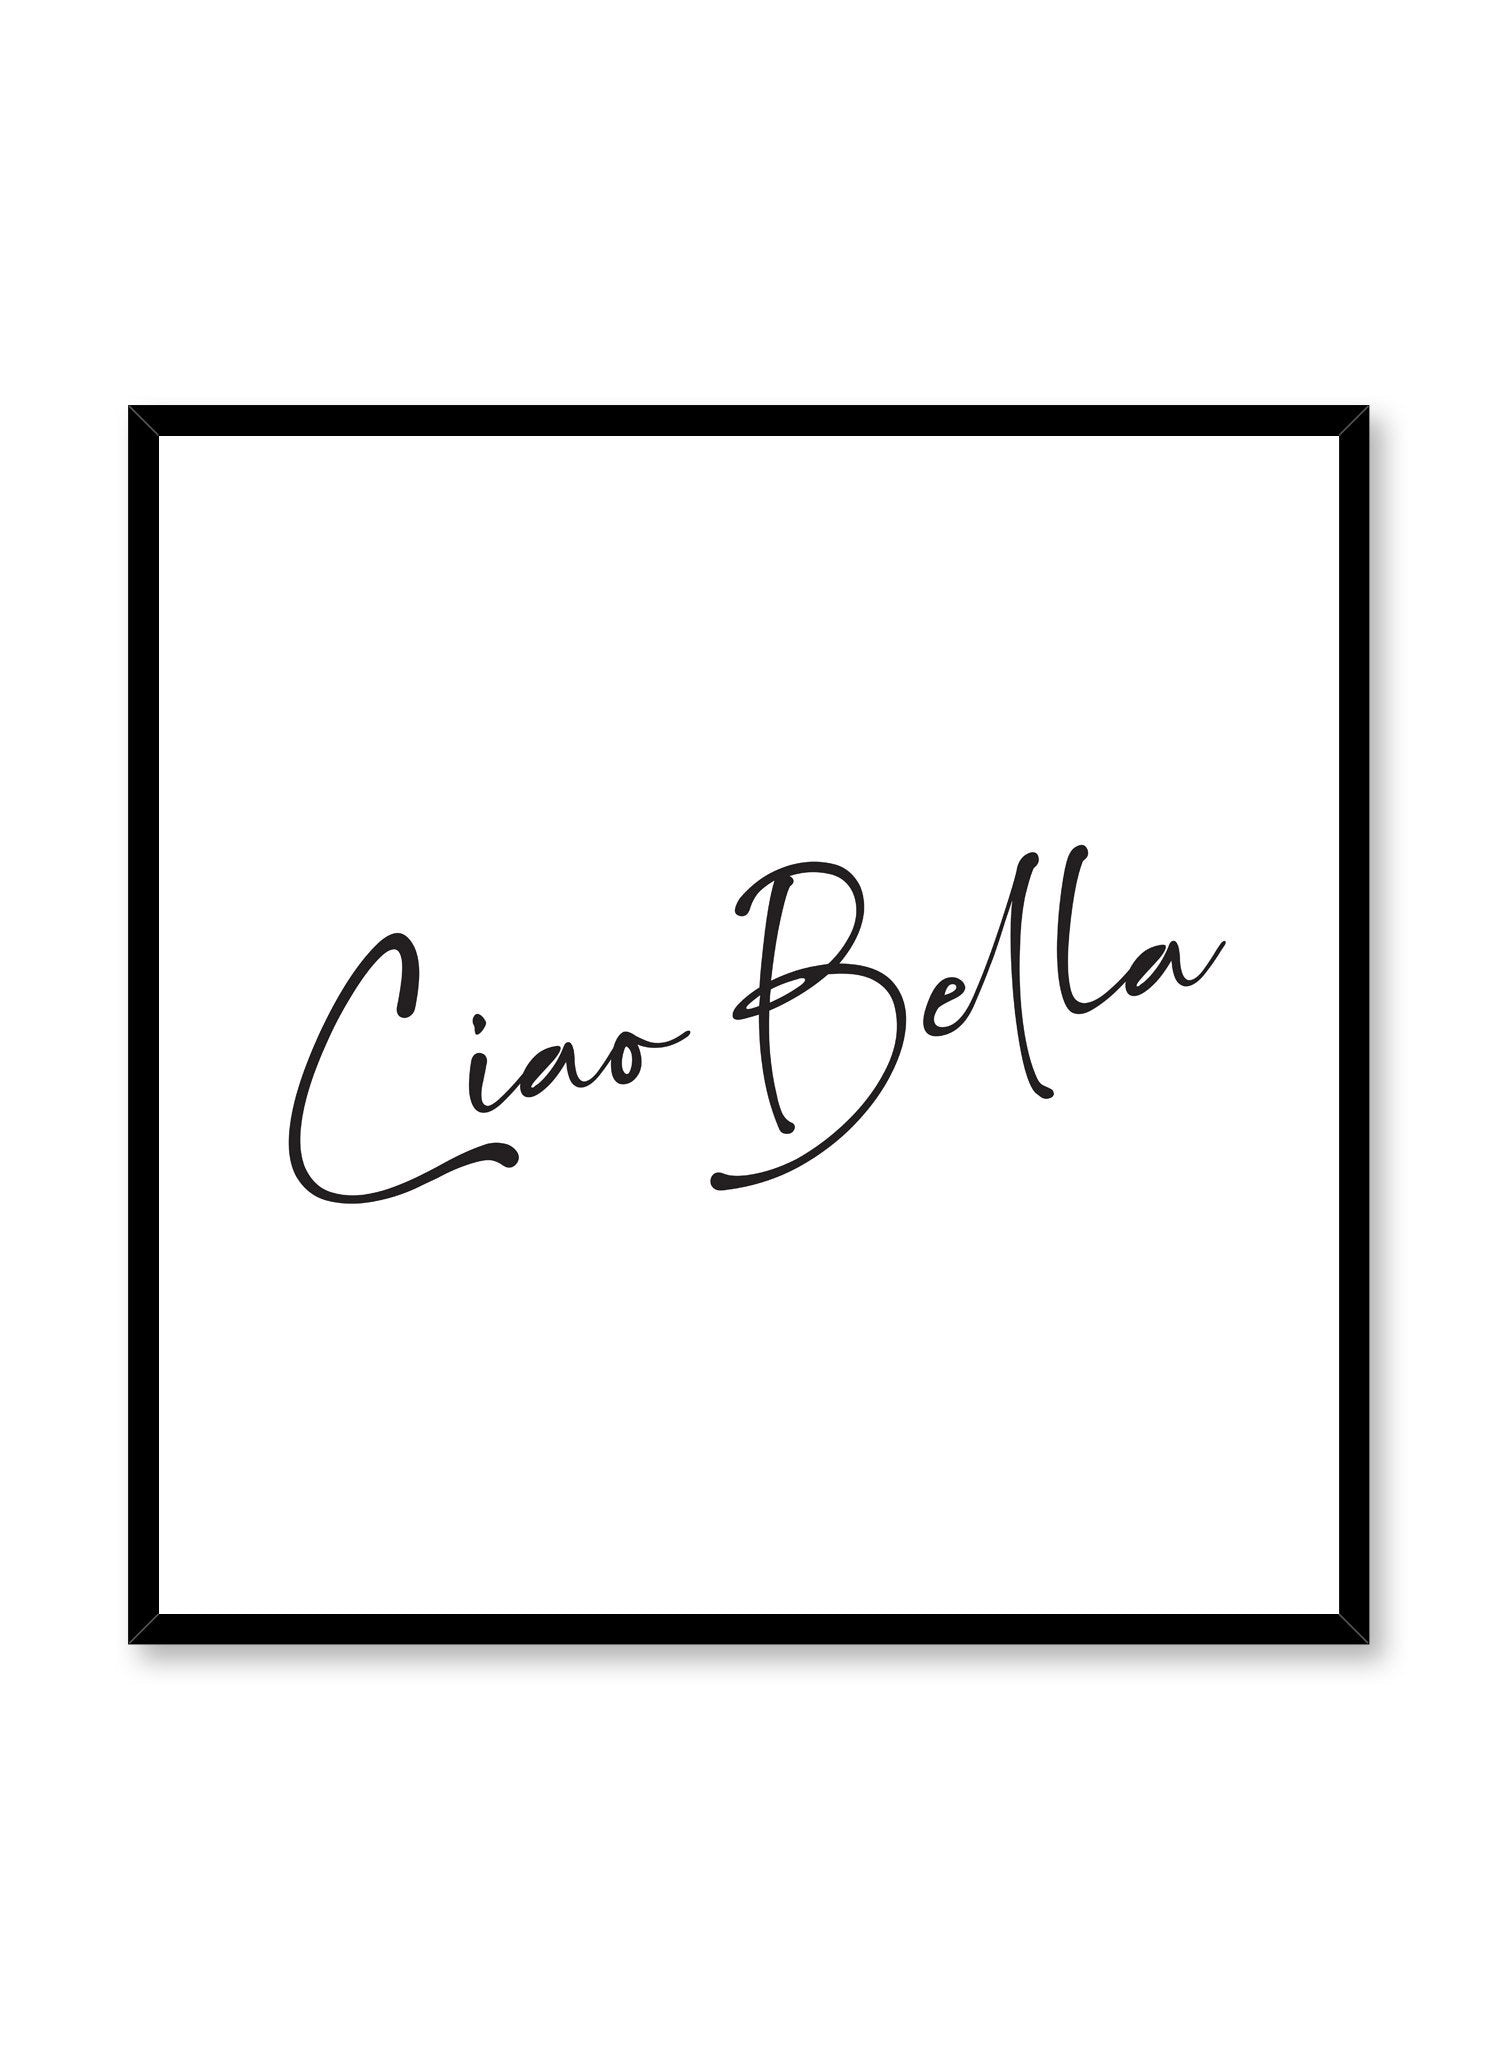 Ciao Bella modern minimalist typography art print by Opposite Wall in square format